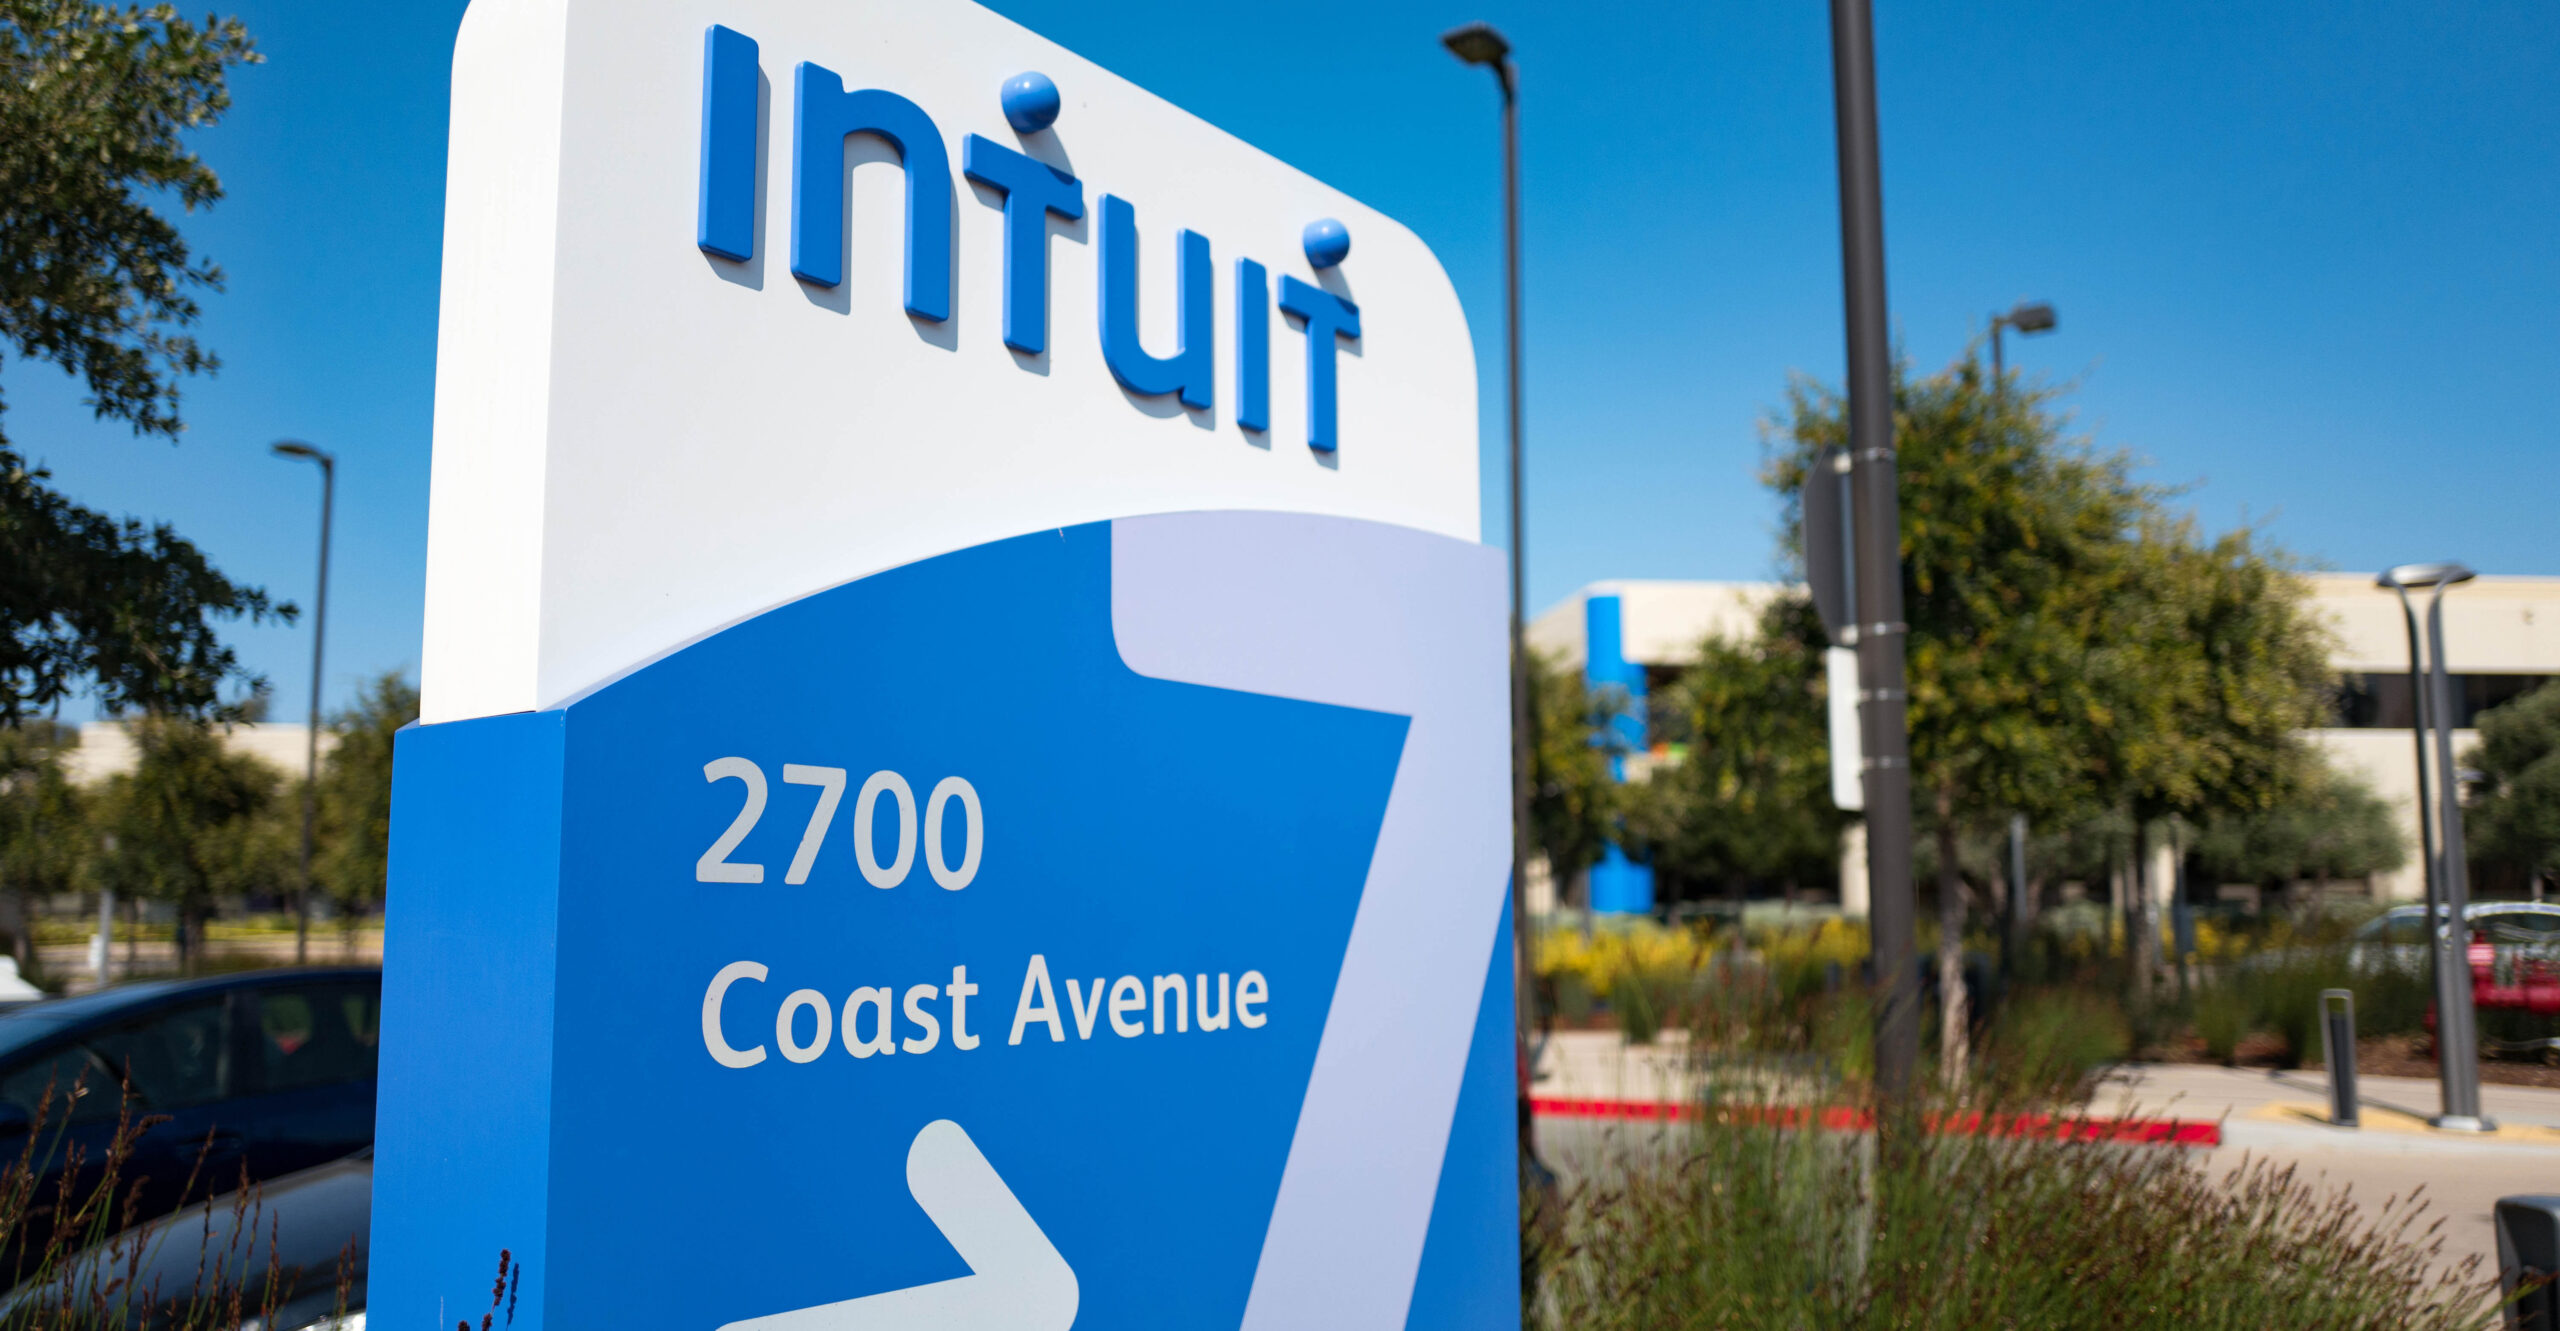 After Cruz Applies Heat, Intuit Sees Light and Backs Down on Anti-Gun Policy